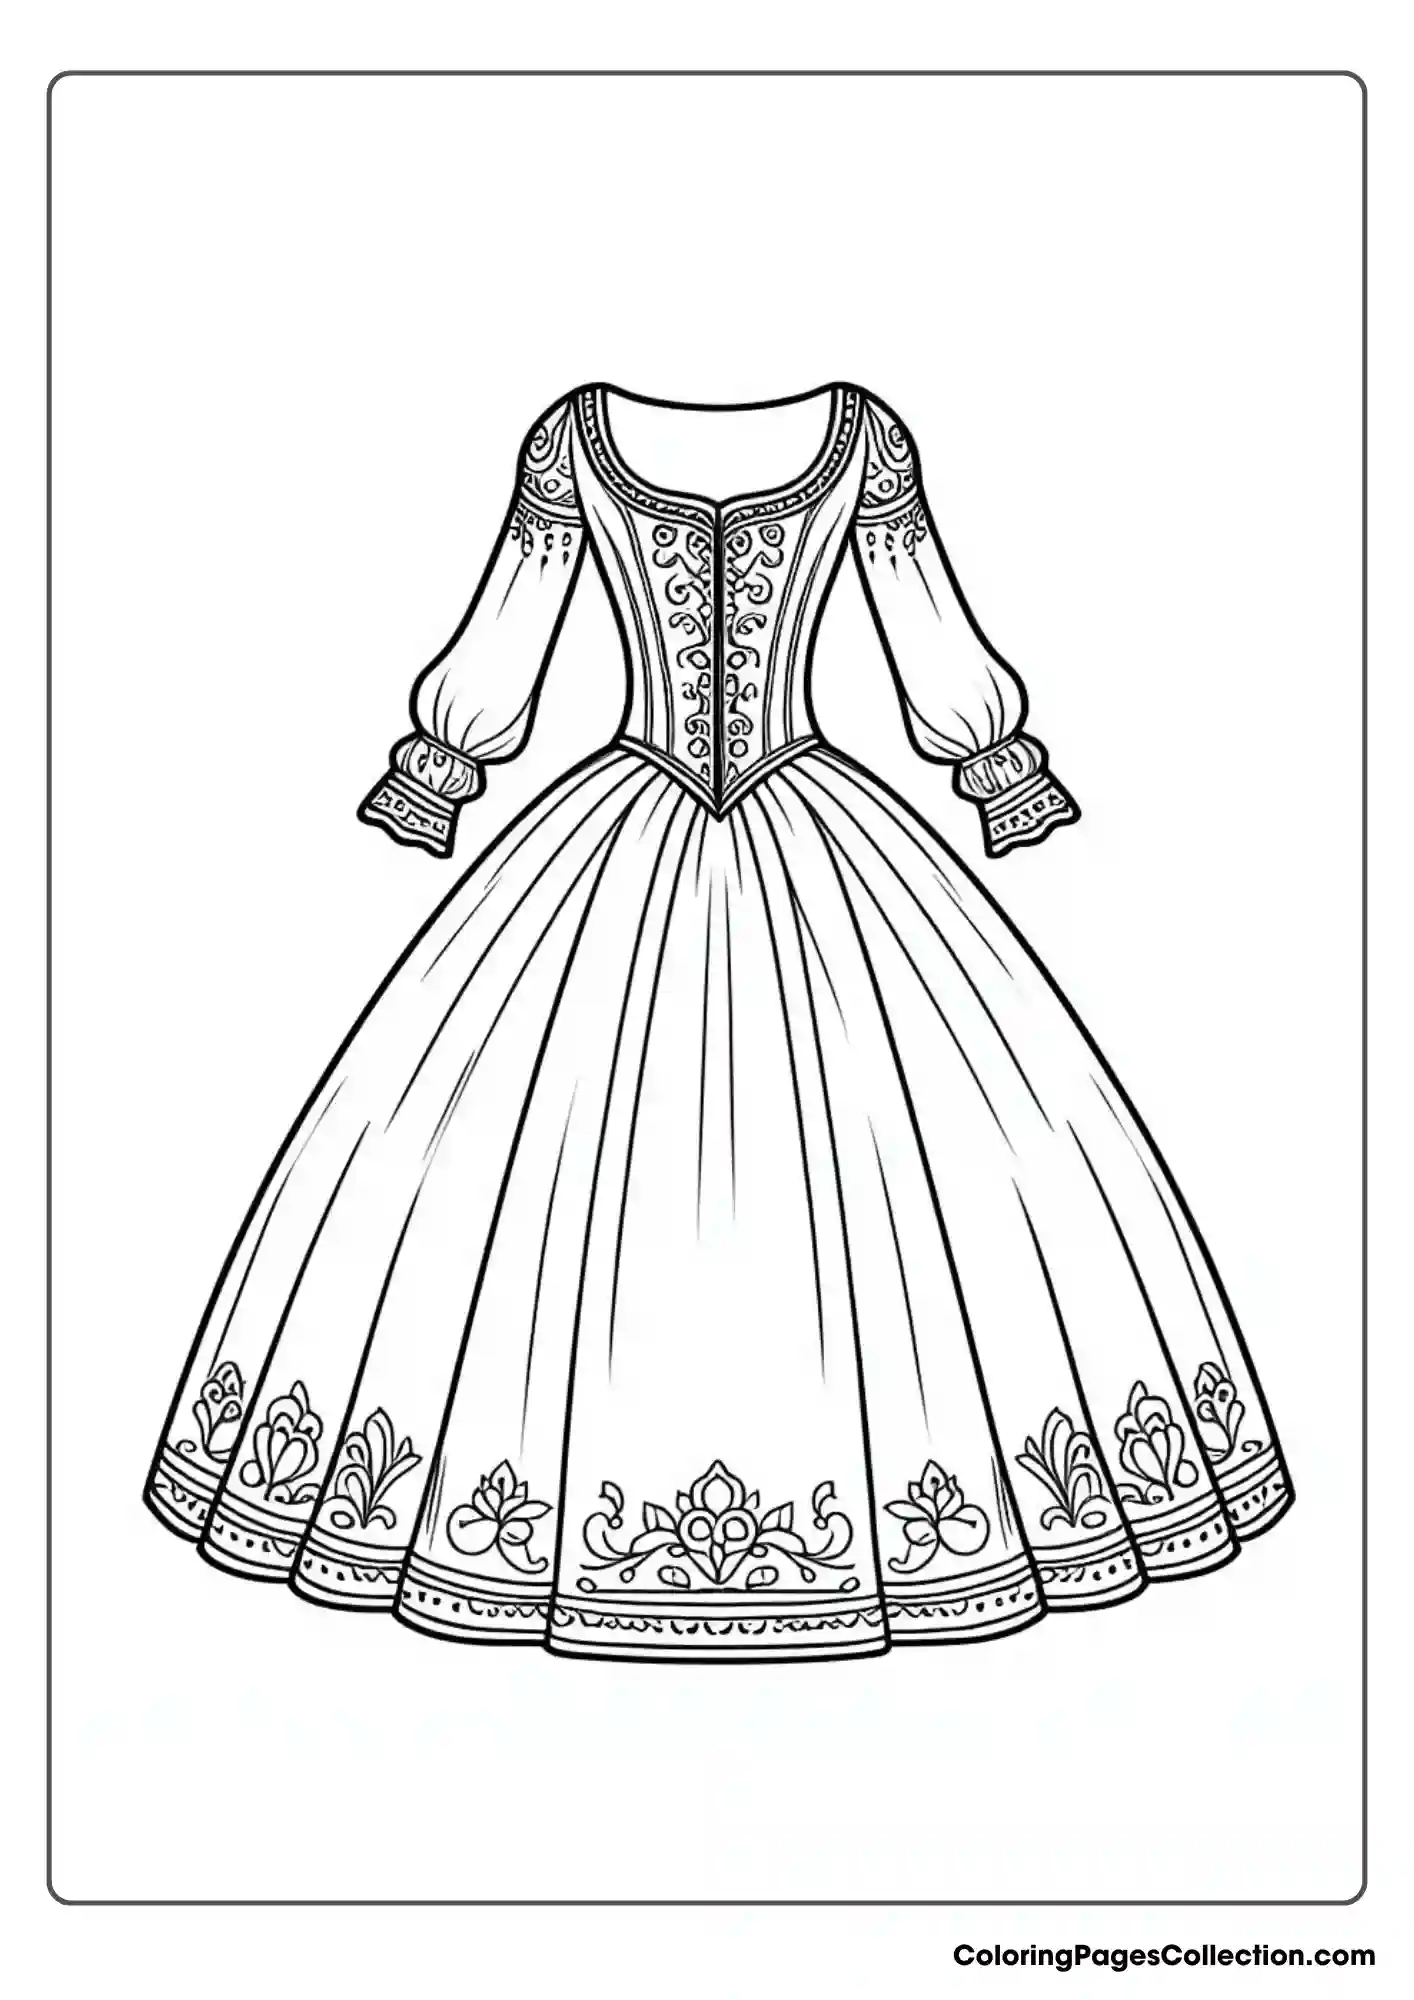 A High-necked Princess Dress With Long, Fitted Sleeves And An Embroidered Bodice